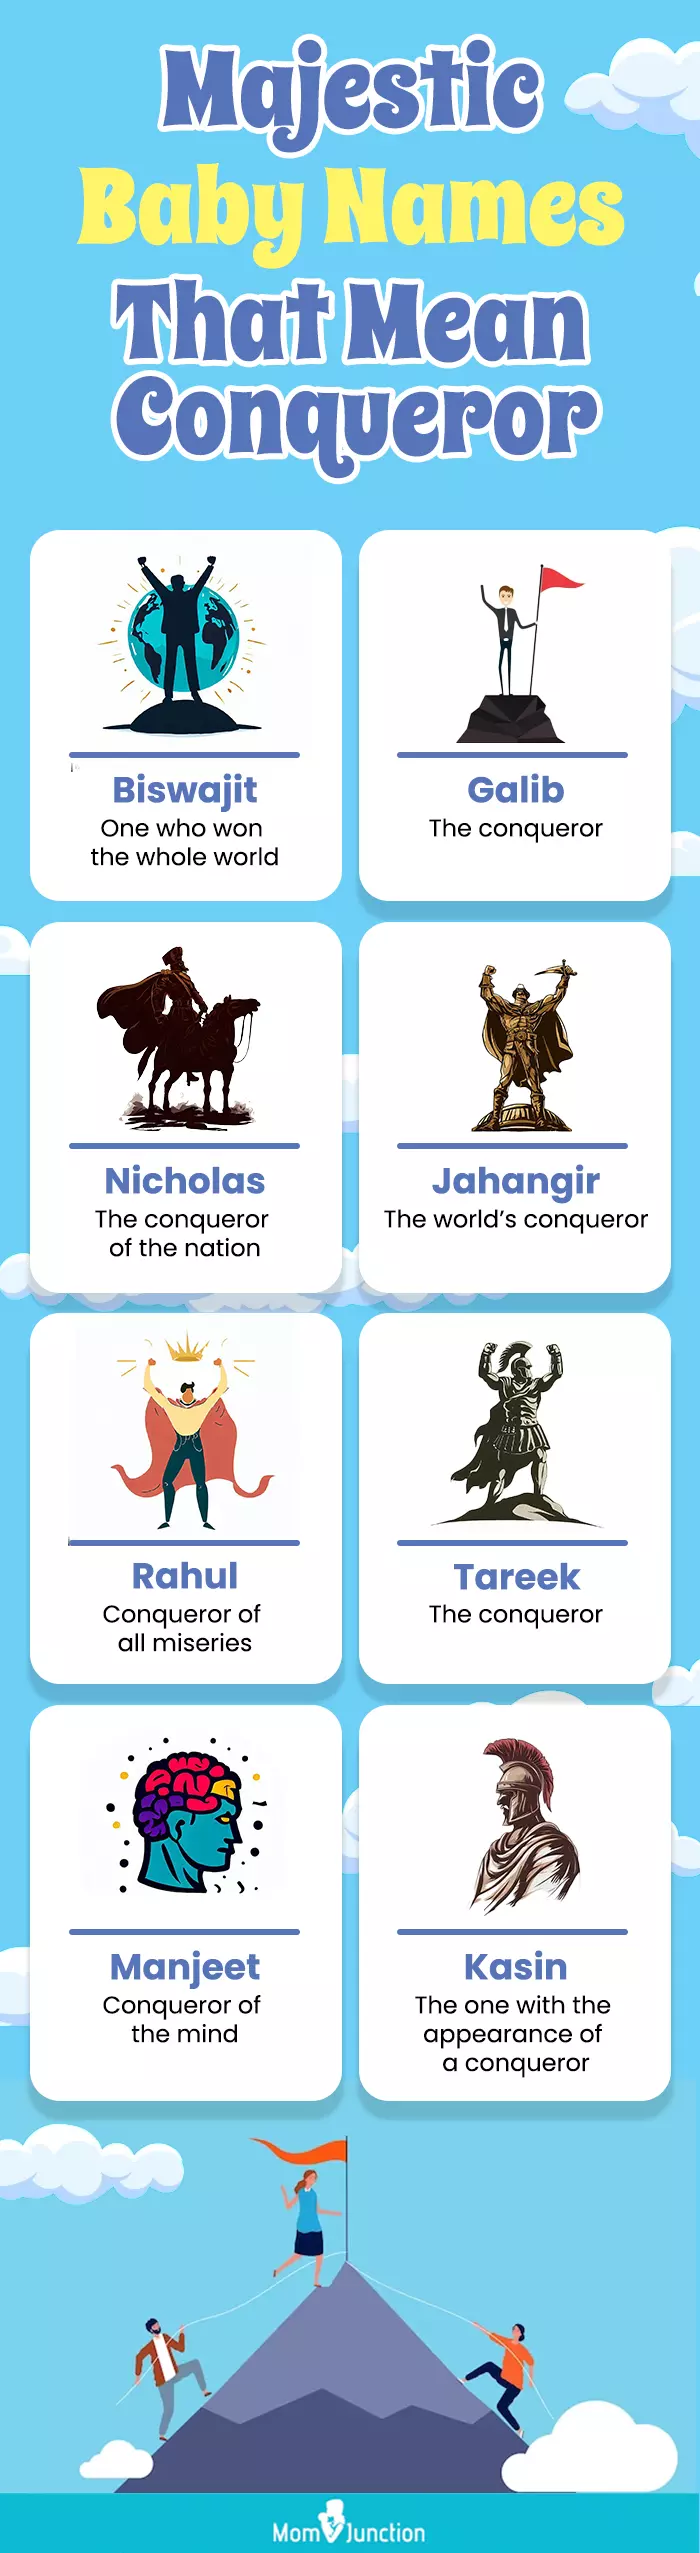 majestic baby names that mean conqueror (infographic)